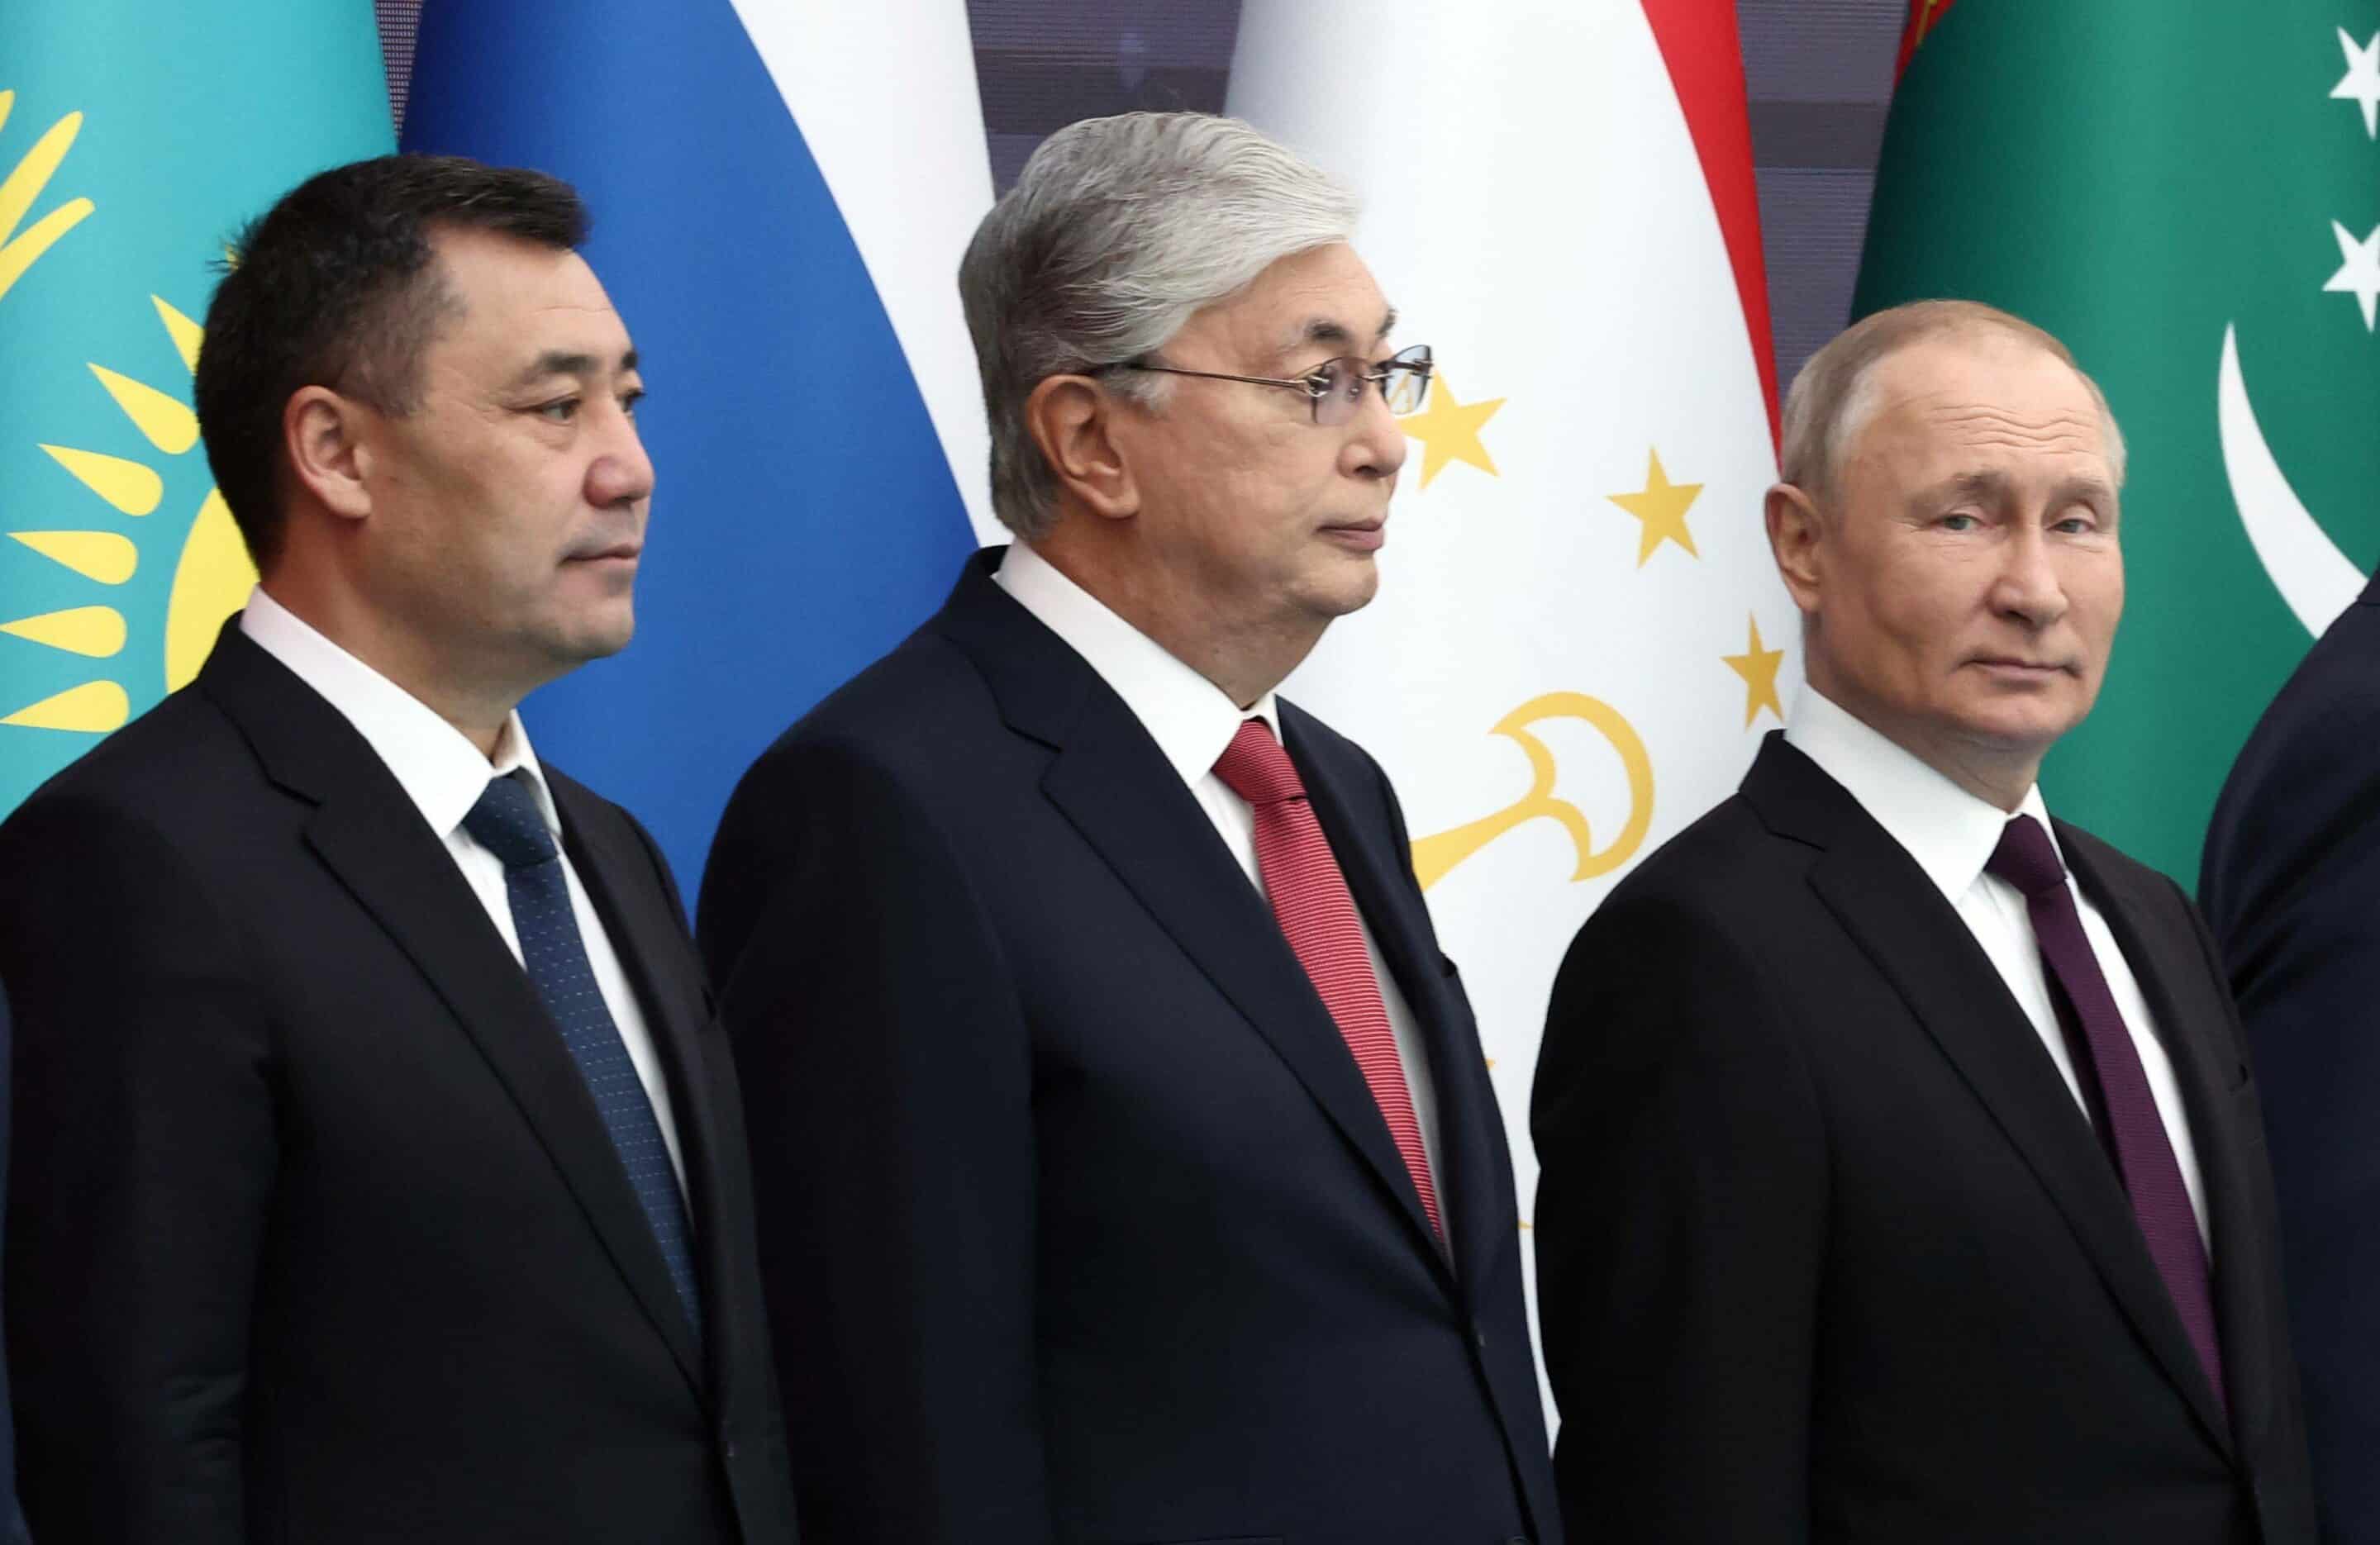 8294965 14.10.2022 In this handout photo released by the Kazakh Presidential Press Office, Kyrgyz President Sadyr Japarov, Kazakhstan's President Kassym-Jomart Tokayev and Russian President Vladimir Putin attend a joint photographing ceremony of the Commonwealth of Independent States (CIS) heads of state on the sidelines of the 6th Summit of the Conference on Interaction and Confidence Building Measures in Asia (CICA) at the Palace of Independence in Astana, Kazakhstan. Editorial use only, no archive, no commercial use. Valeriy Sharifulin / POOL//SPUTNIK_8294965_63490a7964328/2210141321/Credit:Valeriy Sharifulin/SPUTNI/SIPA/2210141332